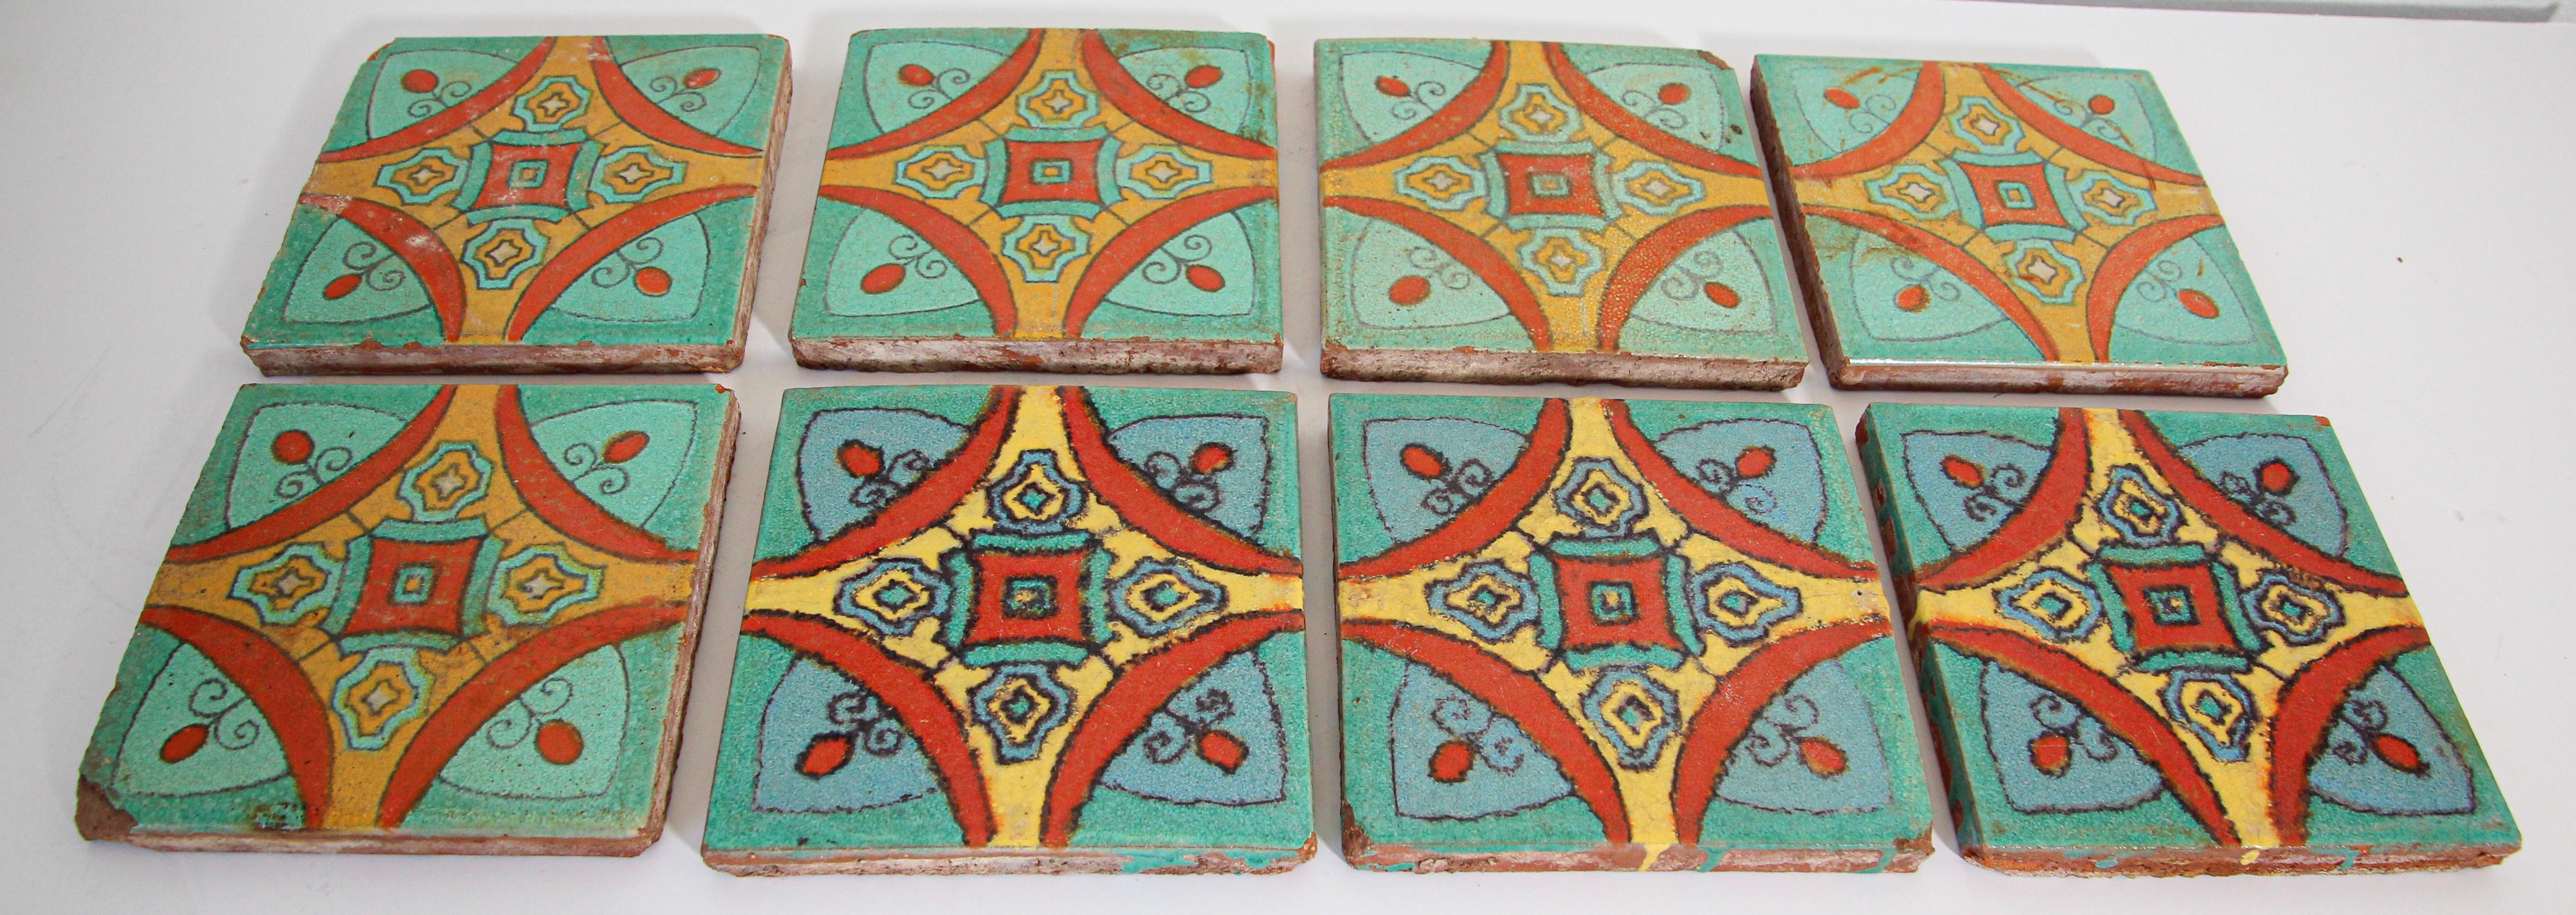 Talavera Handcrafted Spanish Wall Tiles Set of 8 For Sale 11